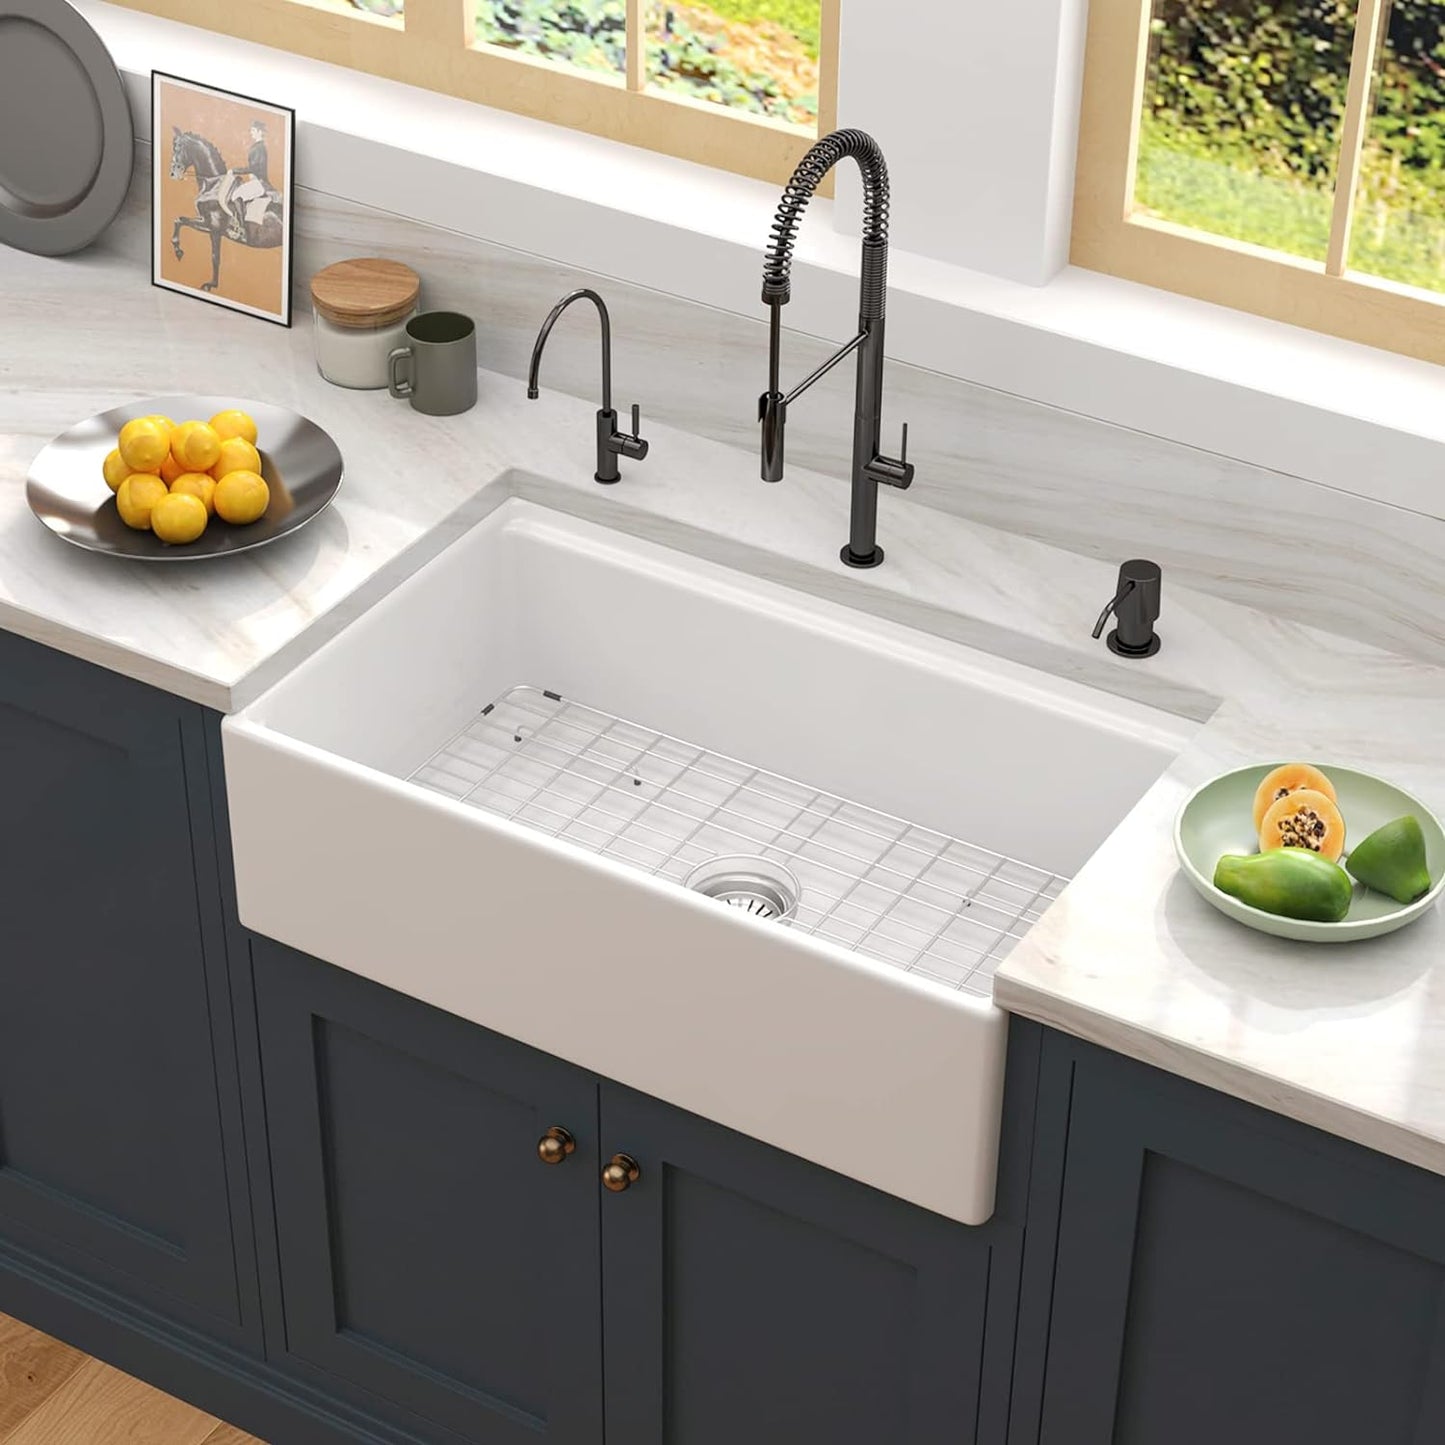 33" x 20" x 10" White Farmhouse Sink, Fireclay Porcelain Single Bowl Apron-Front Workstation Sink, Reversible Ceramic Farm Sink with various accessories